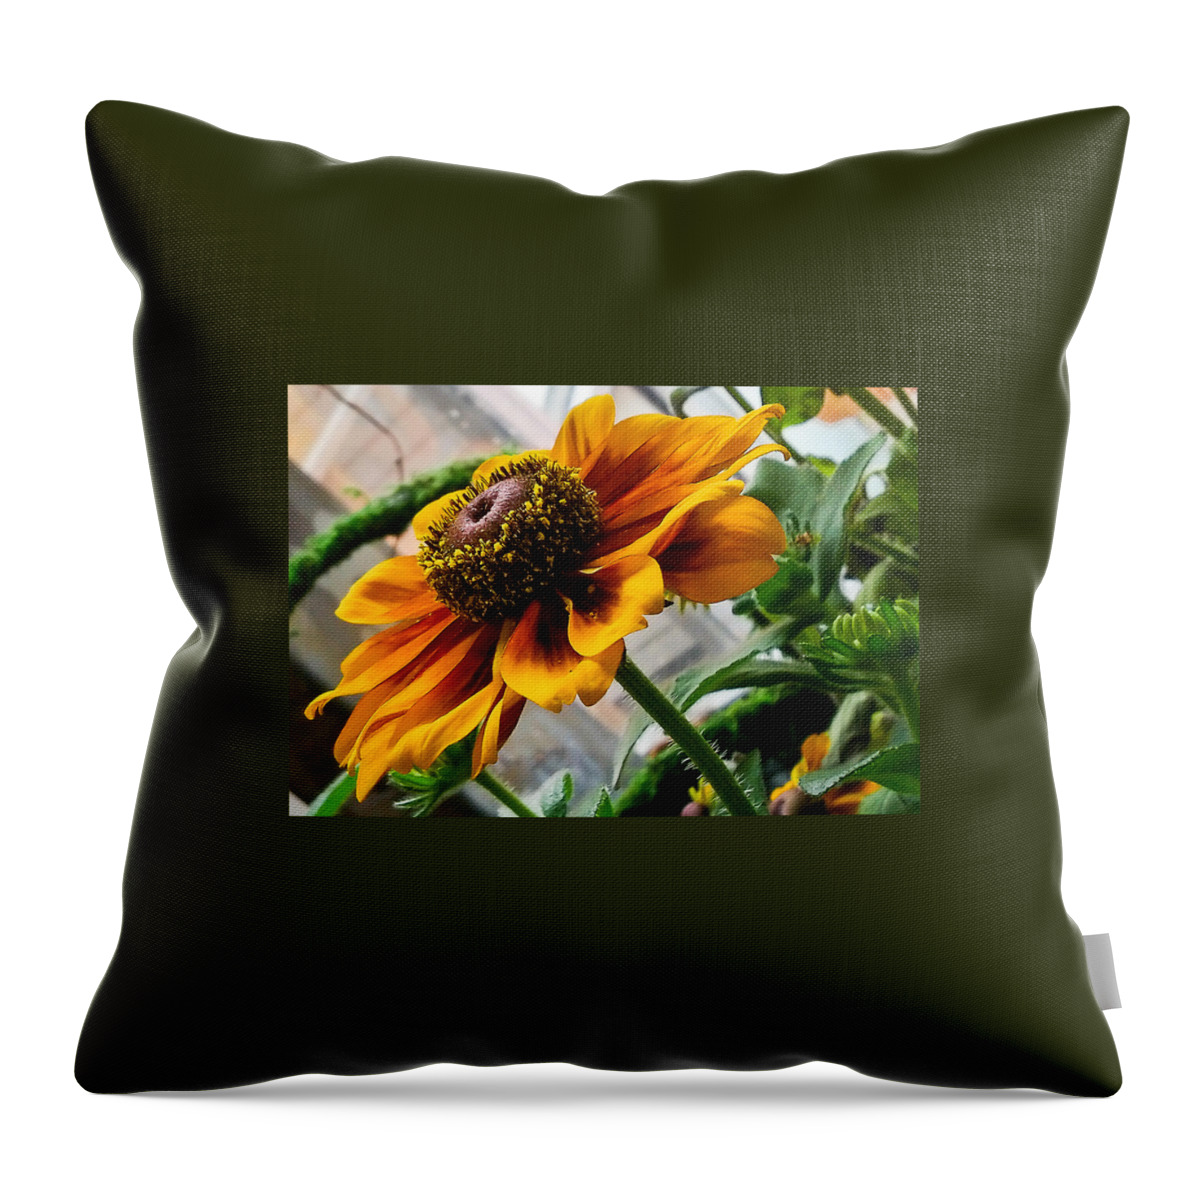 Phone Pics Throw Pillow featuring the photograph Greenhouse Daisy by Georgette Grossman